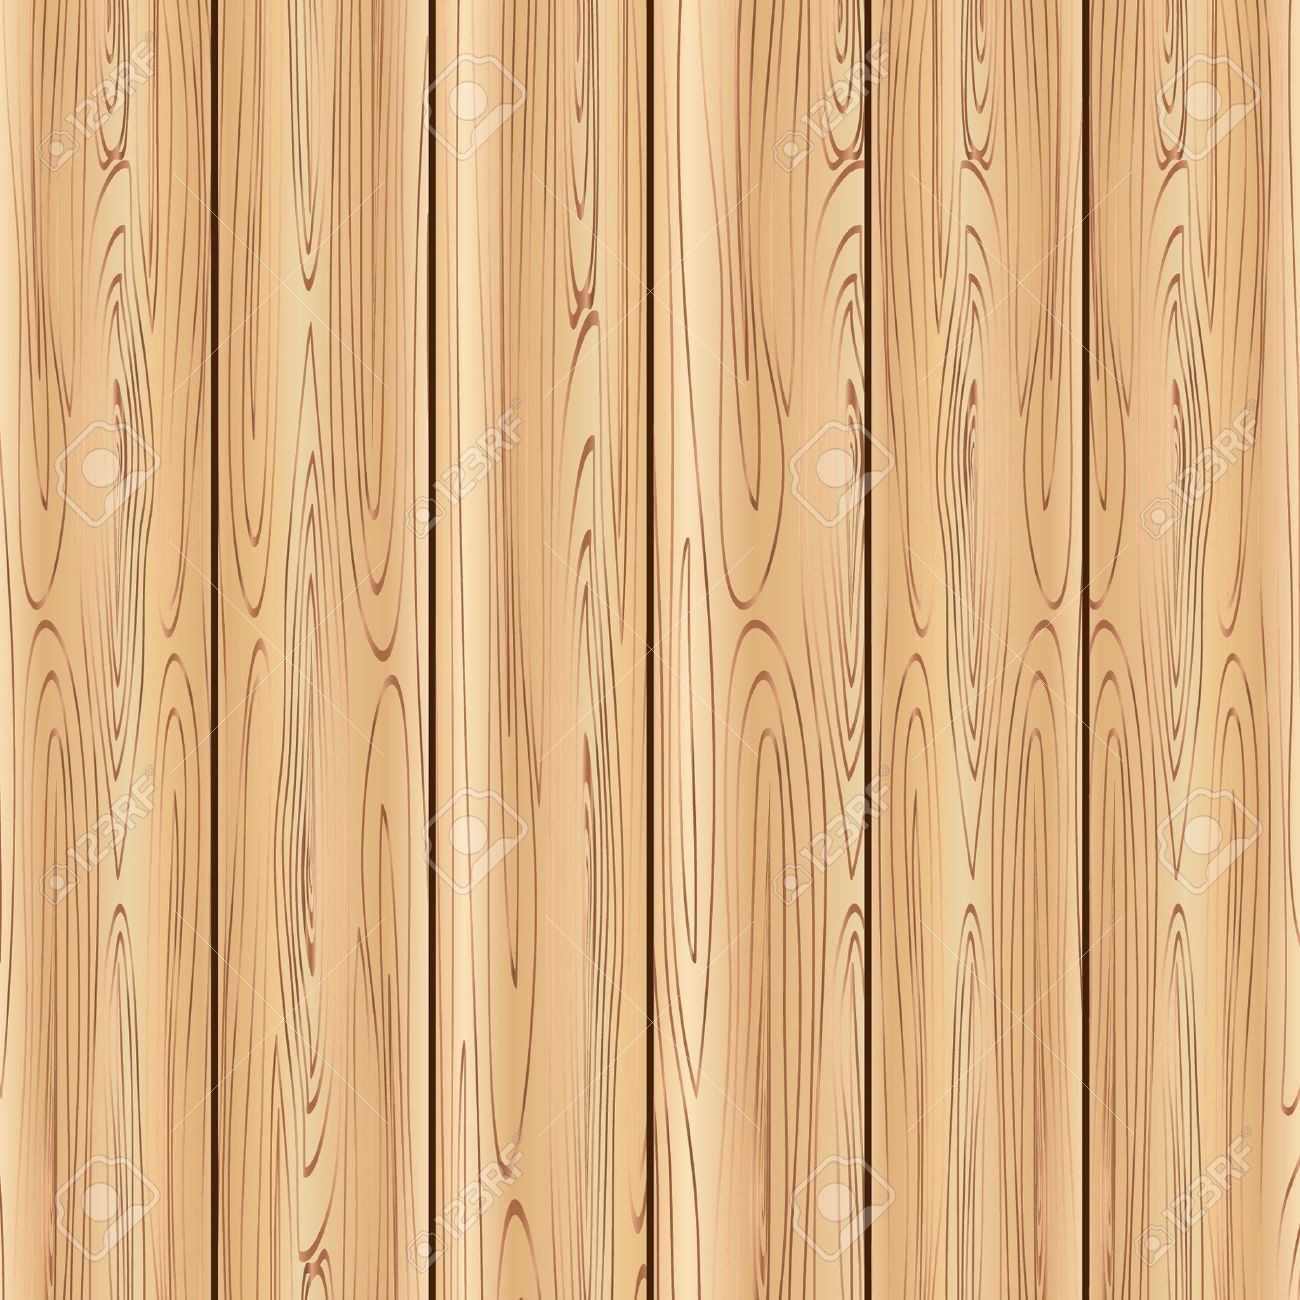 Wood Panel Clipart.